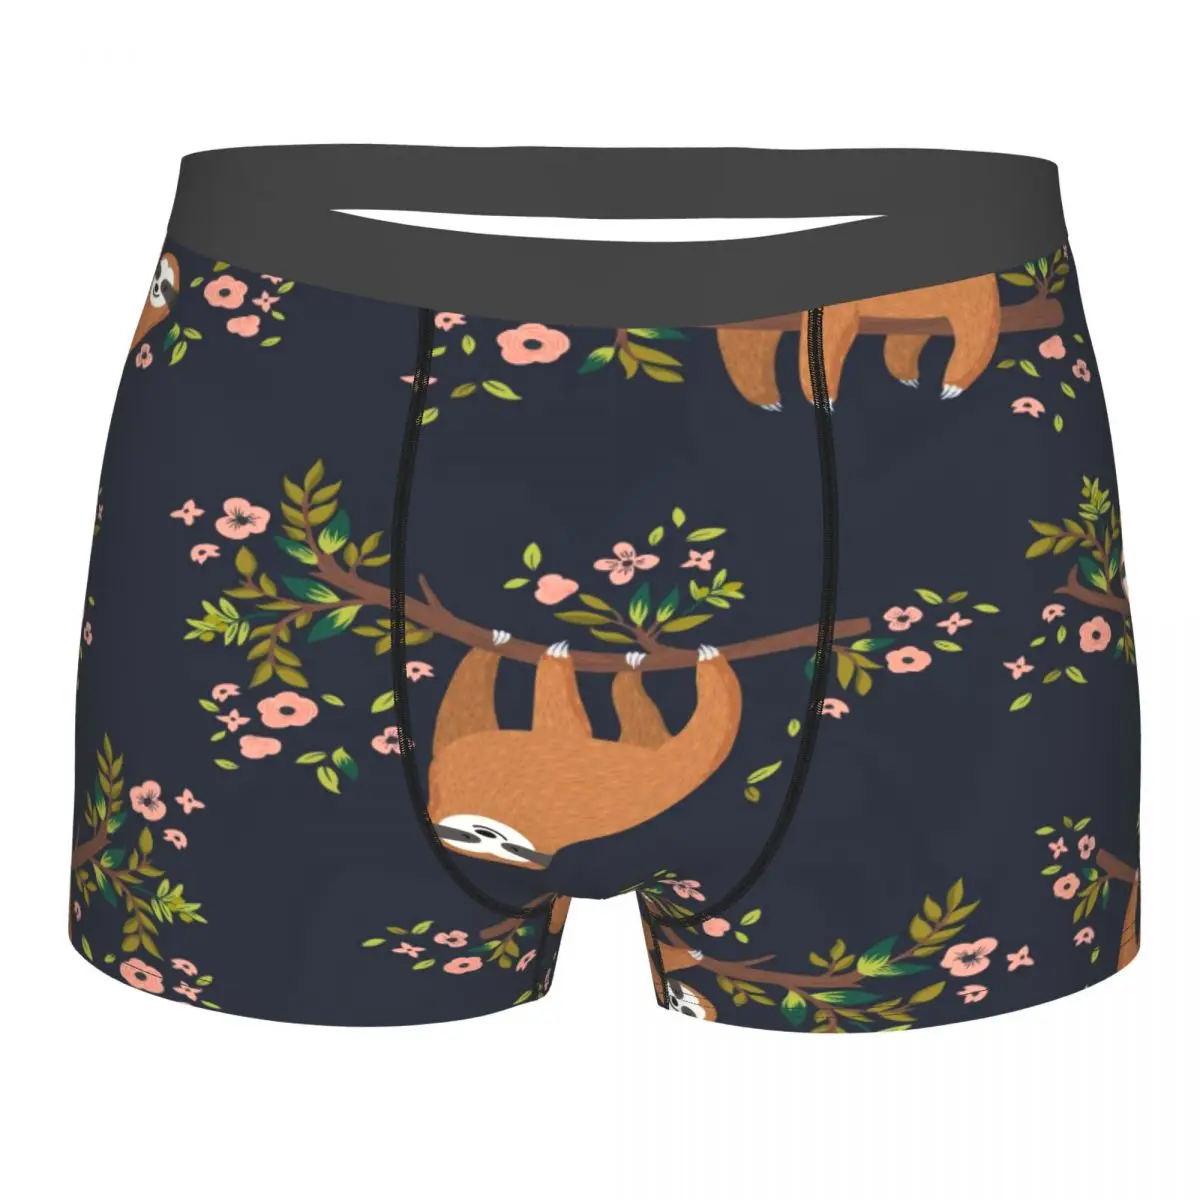 Underwear Men Boxers Funny Sloth With Flowers And Branch Sexy Boxer Underwear Male Panties Underpants Boxershorts Homme